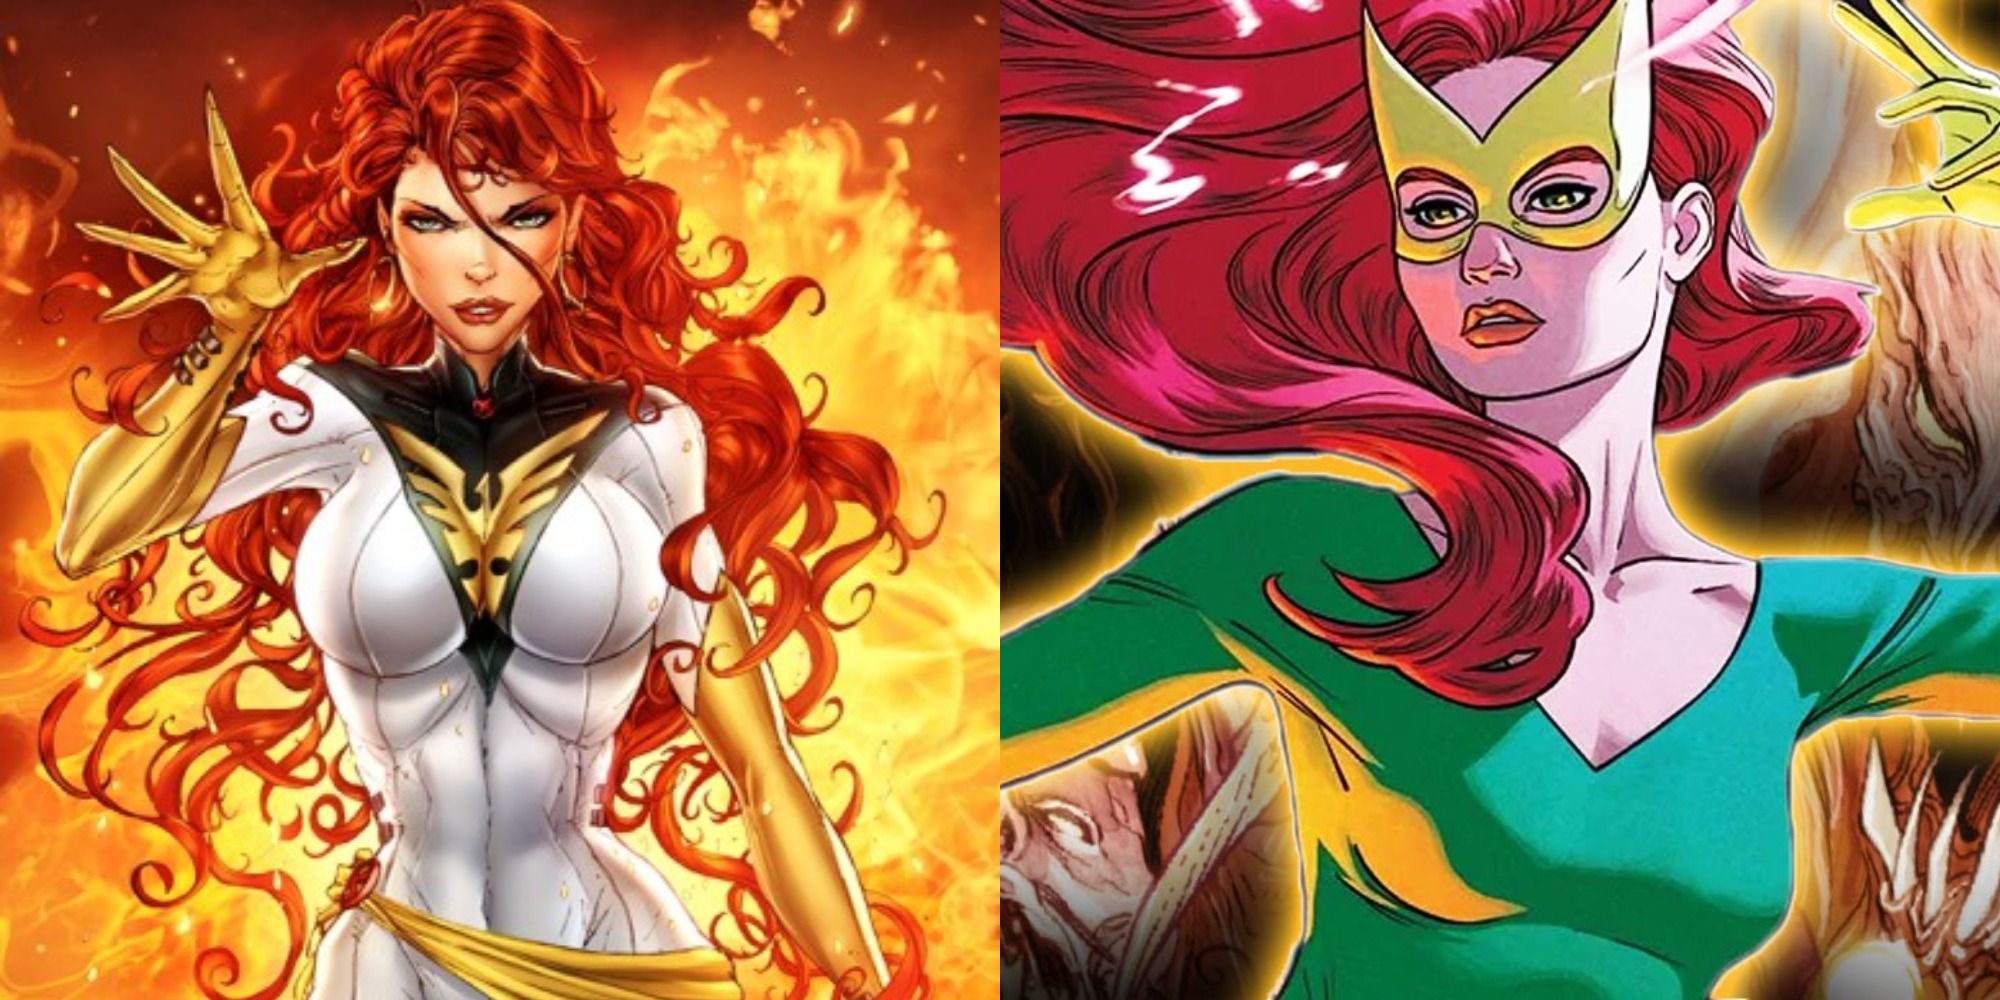 Split iAmage showing Jean Grey as the White Phoenix of the Crown and as Marvel Girl in the X-Men Comics